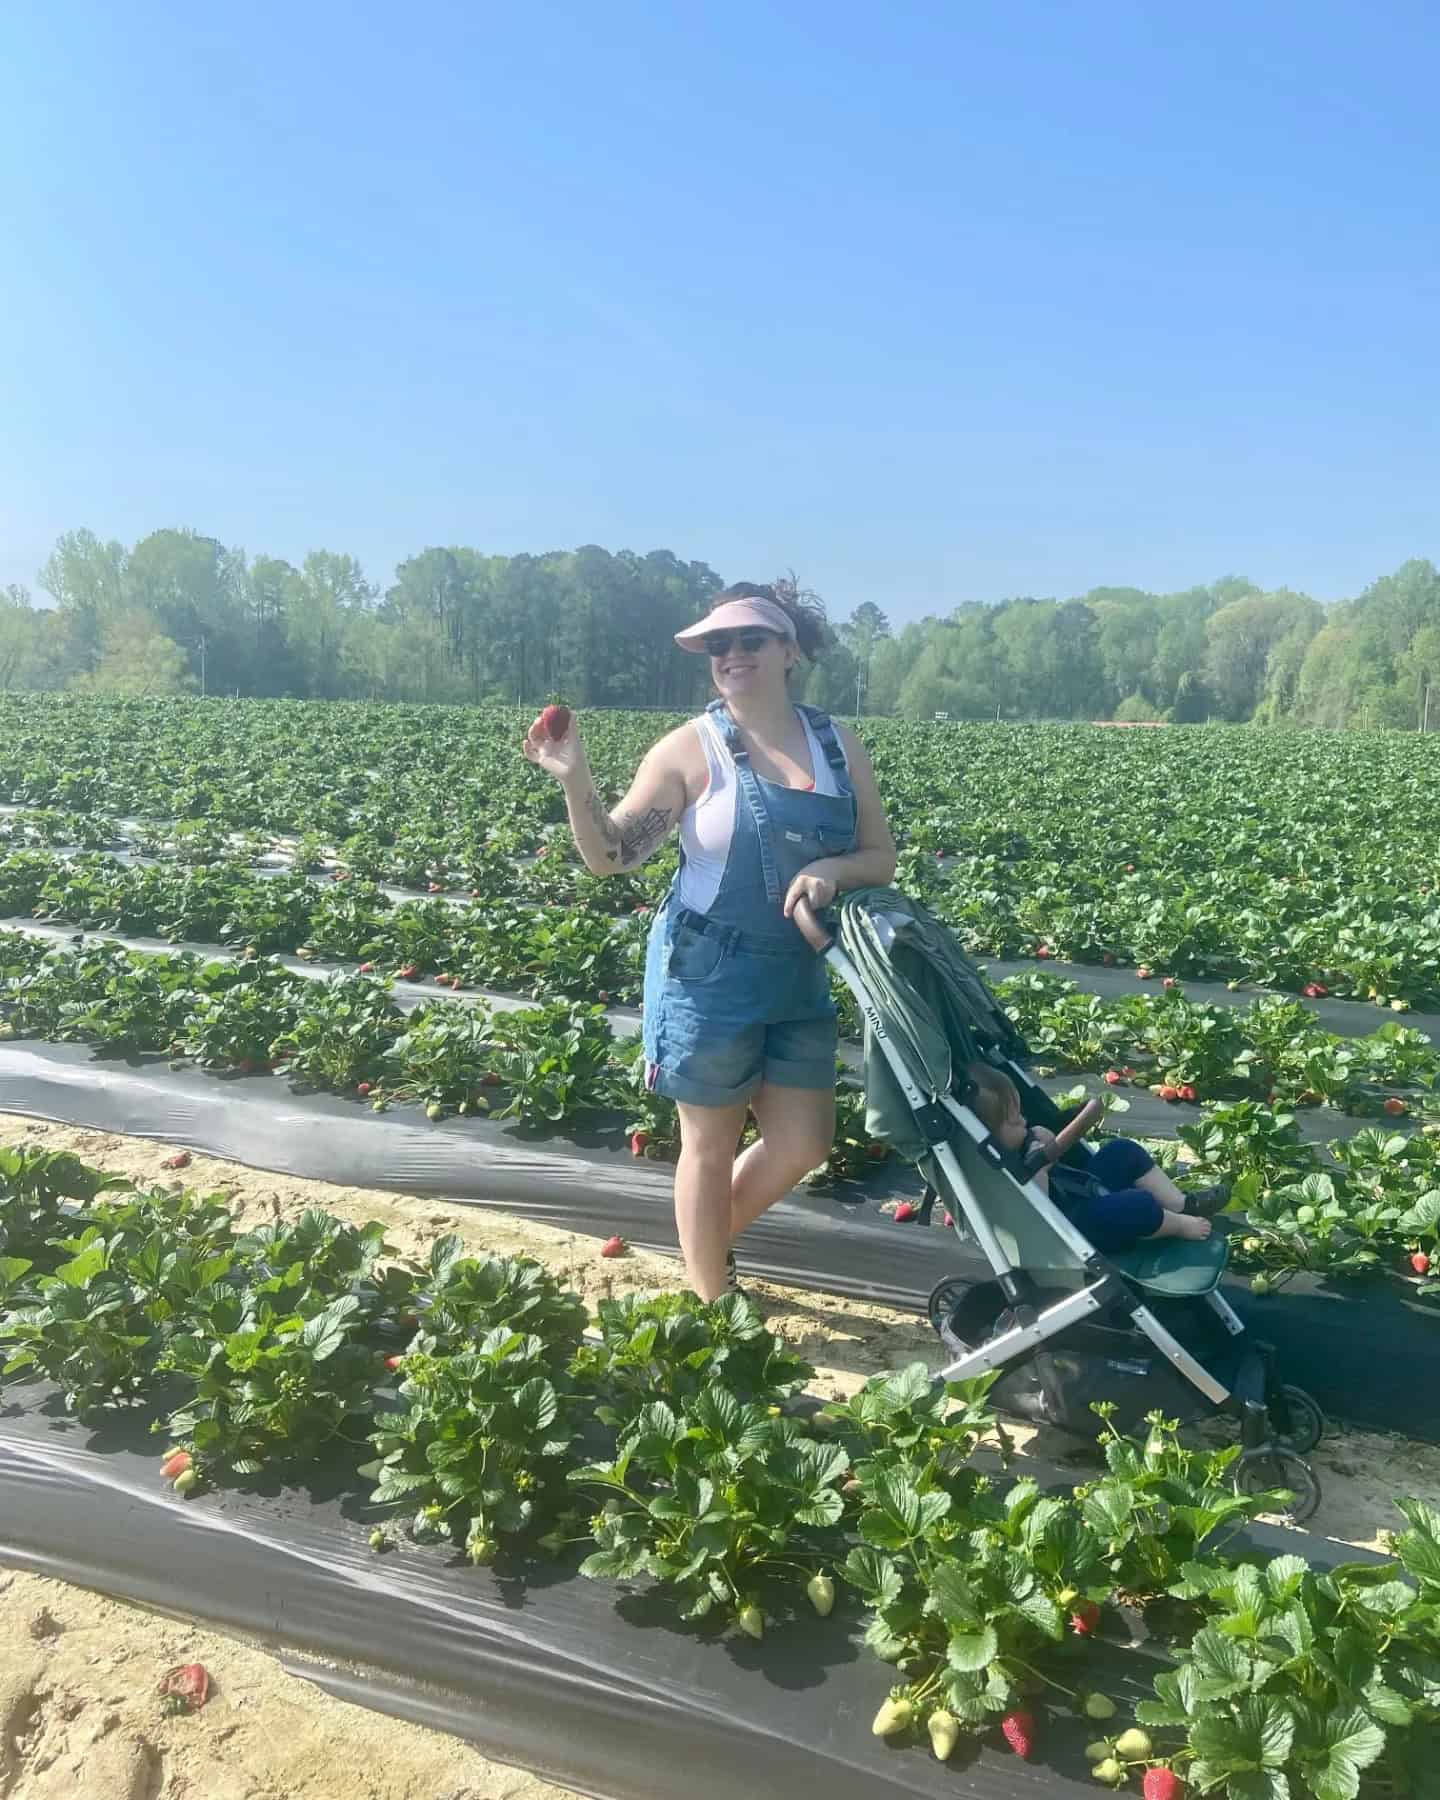 A young woman enjoying strawberry picking near Raleigh, NC. She is wearing a white visor, denim overalls, and sunglasses, holding a ripe strawberry in her right hand while pushing a stroller with a young child through rows of lush strawberry plants under a clear blue sky.